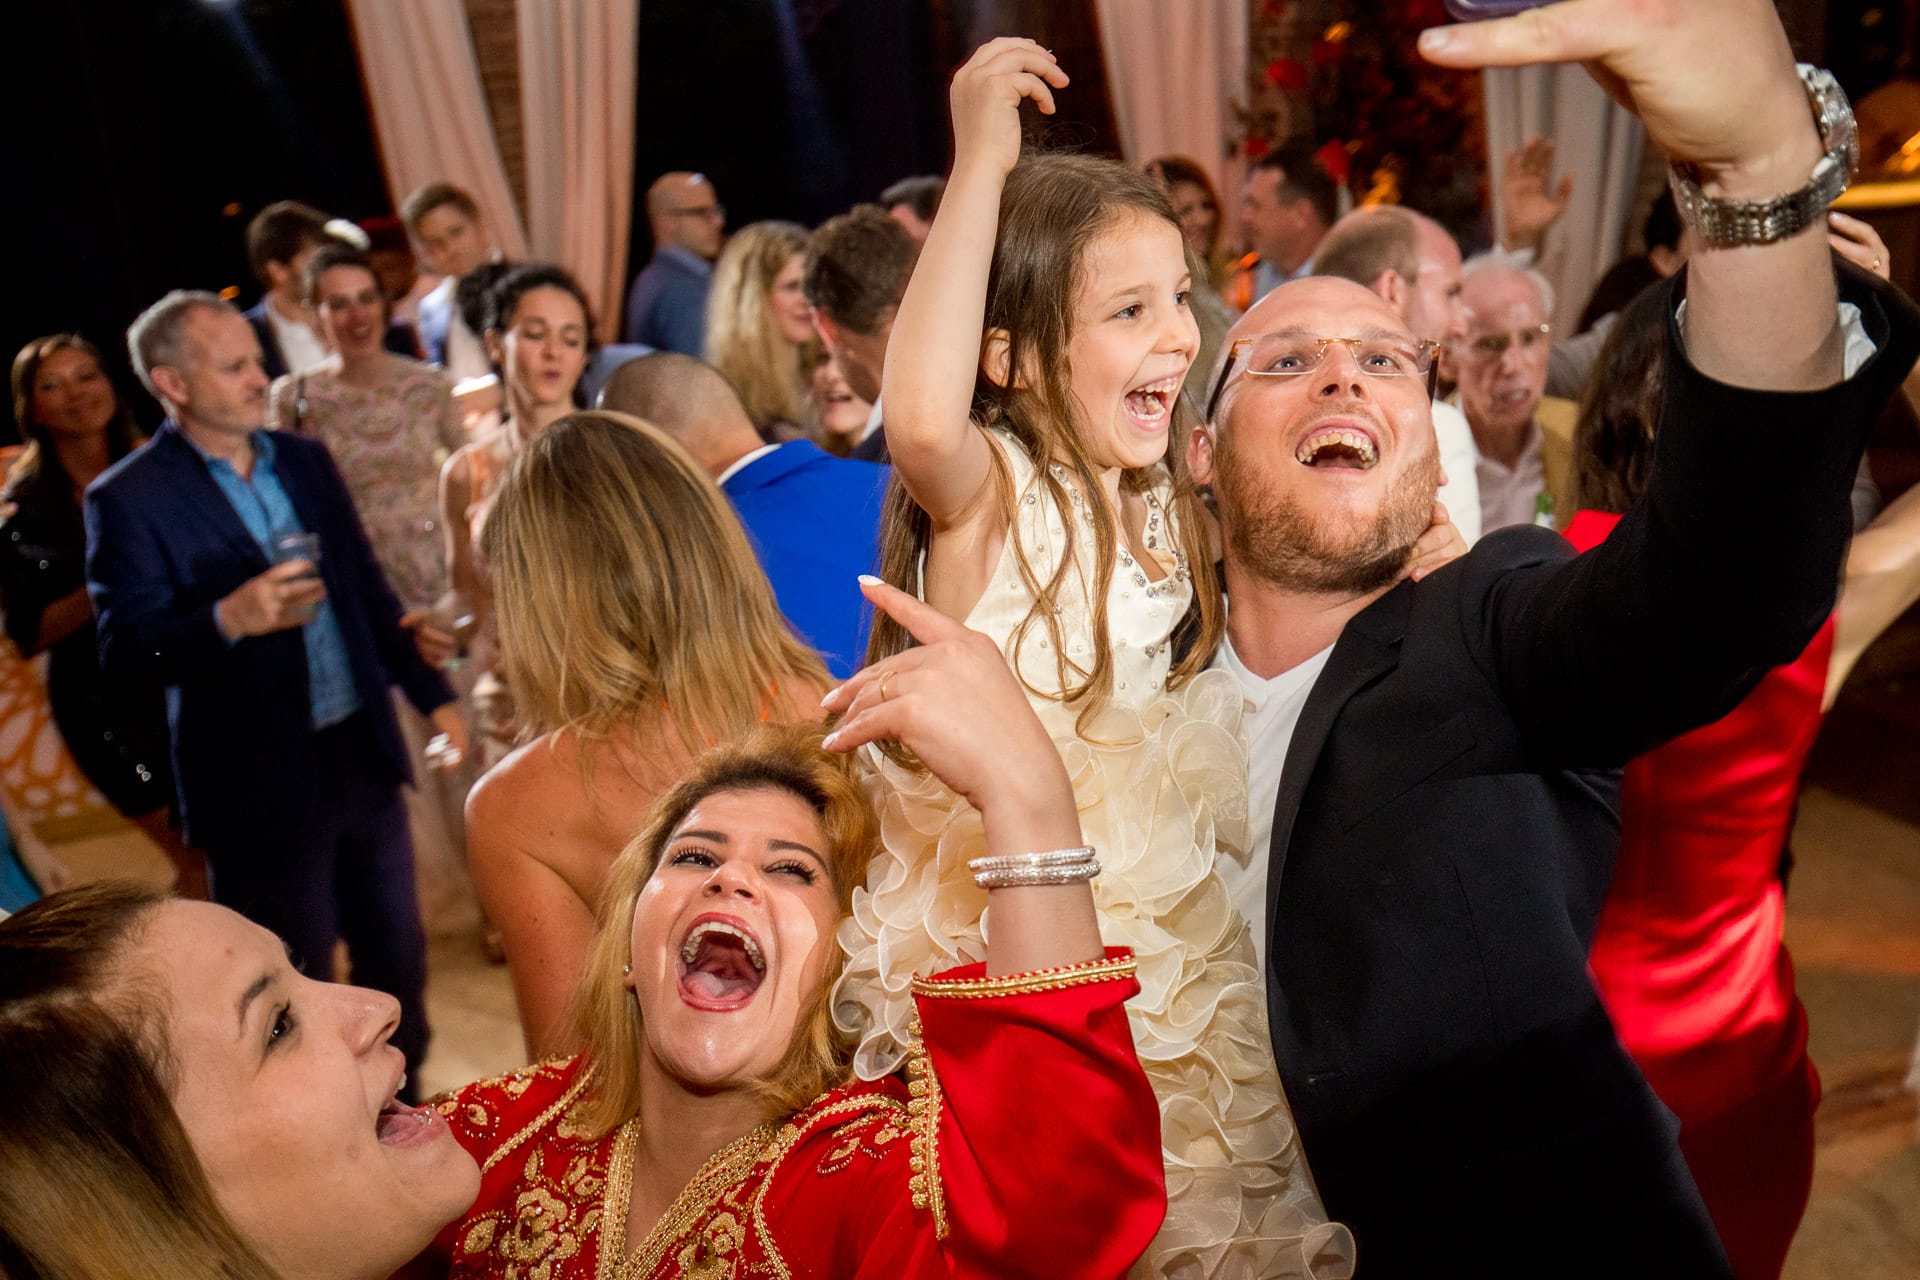 weddings guests partying hard